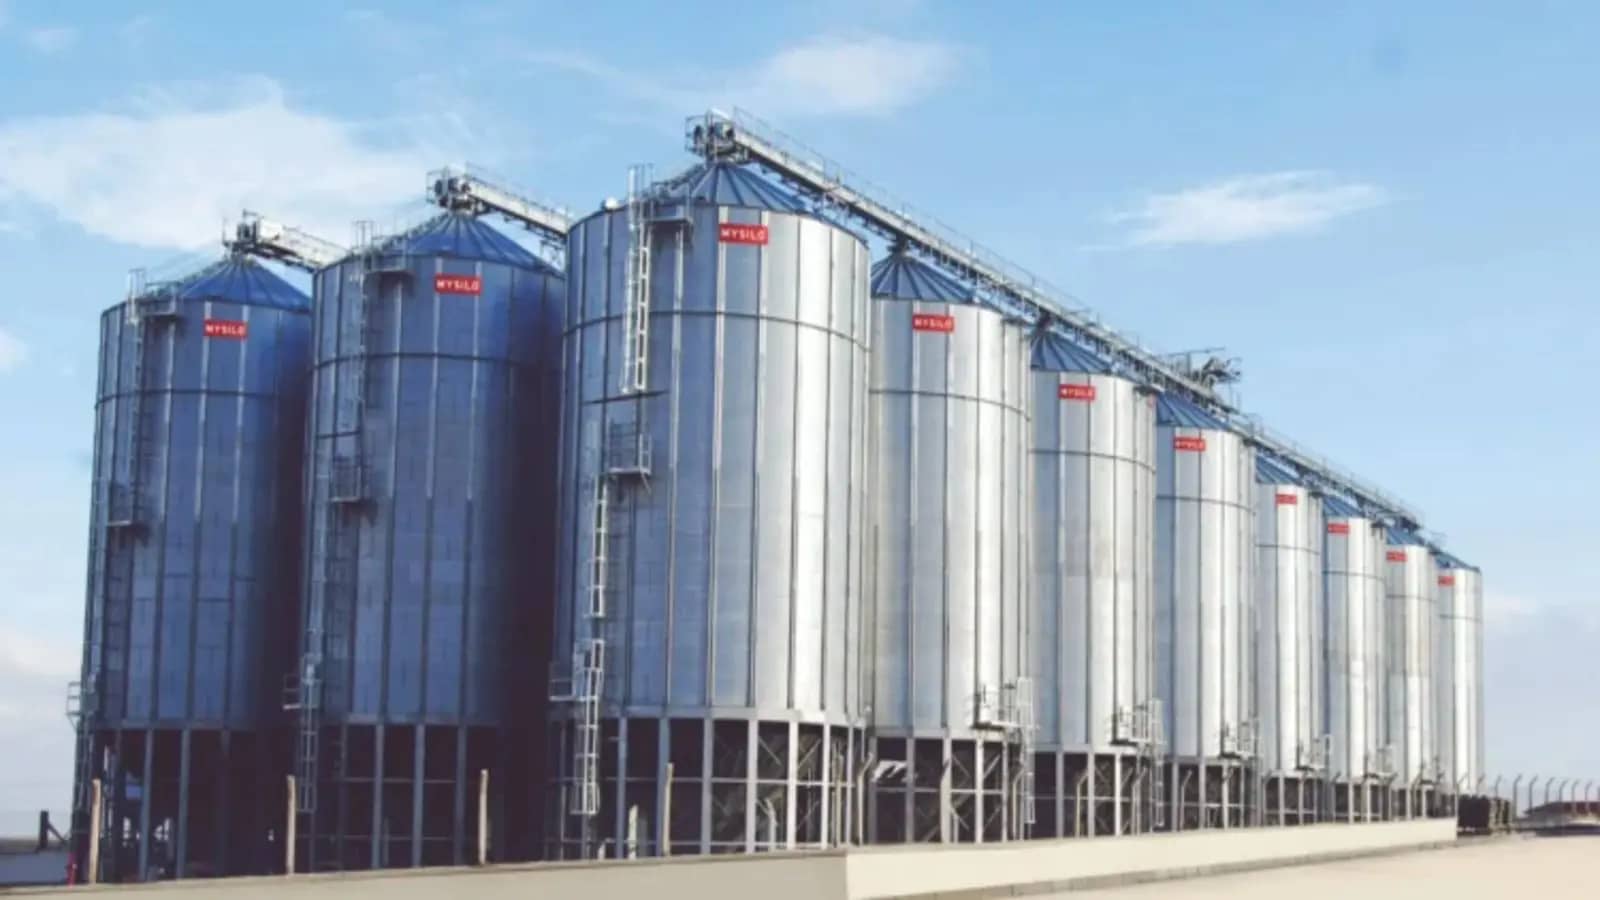 Tanzania Grain Board to spend U7S$8.7 M on construction of flour mills and warehouses